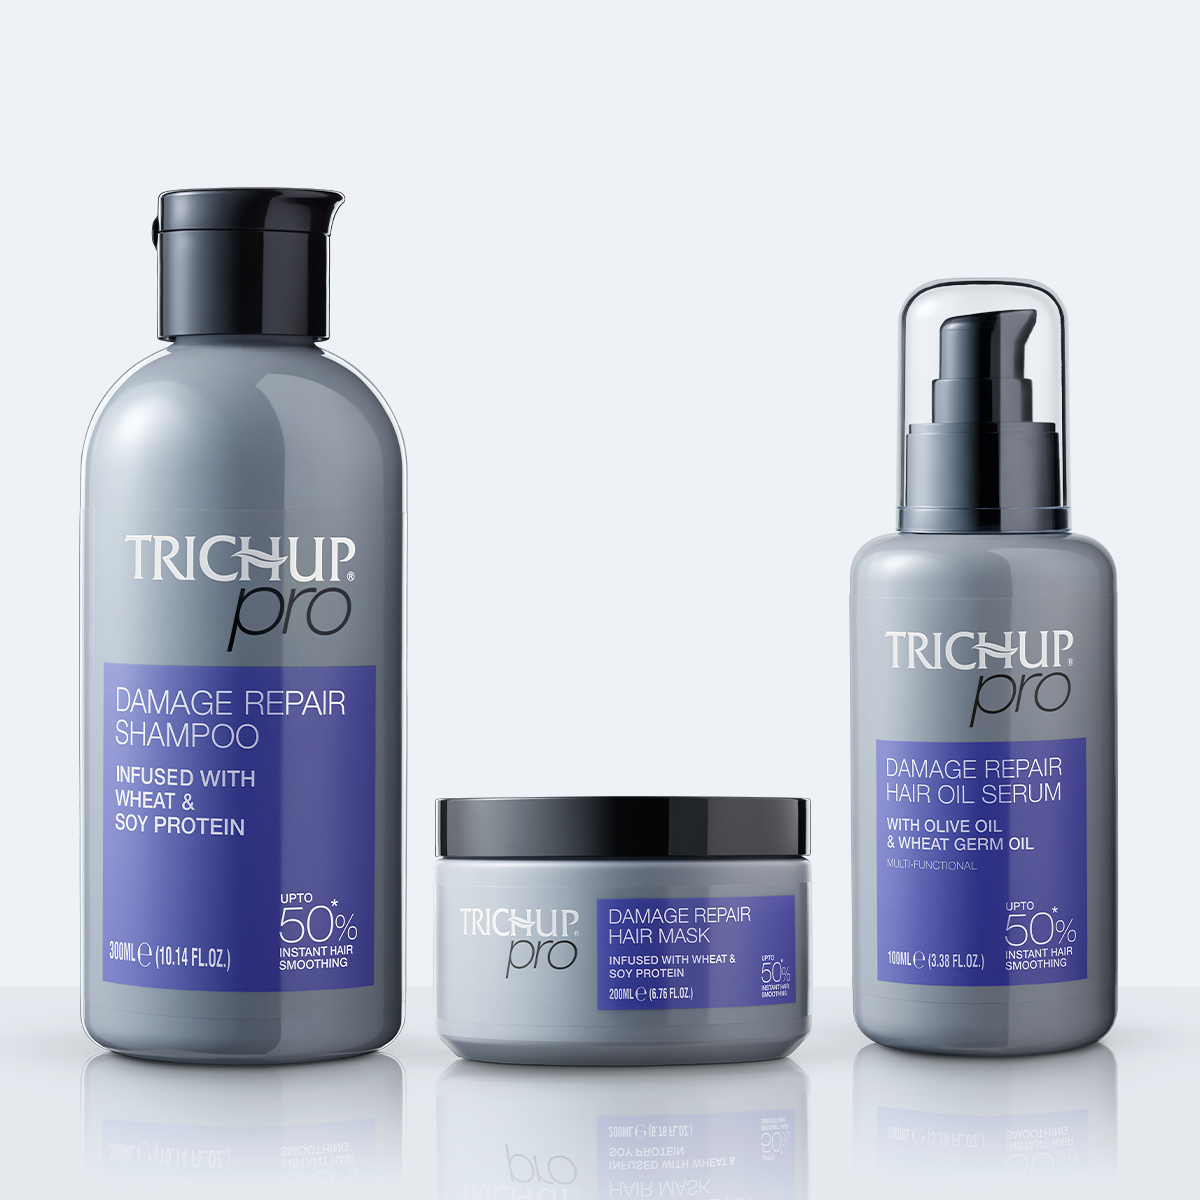 Trichup Pro Damage Repair & Instant Smoothing Hair Care Kit for Dry Frizzy Hair (Set of 3)- Shampoo 300 ml + Hair Oil Serum 100 ml + Hair Mask 200 ml